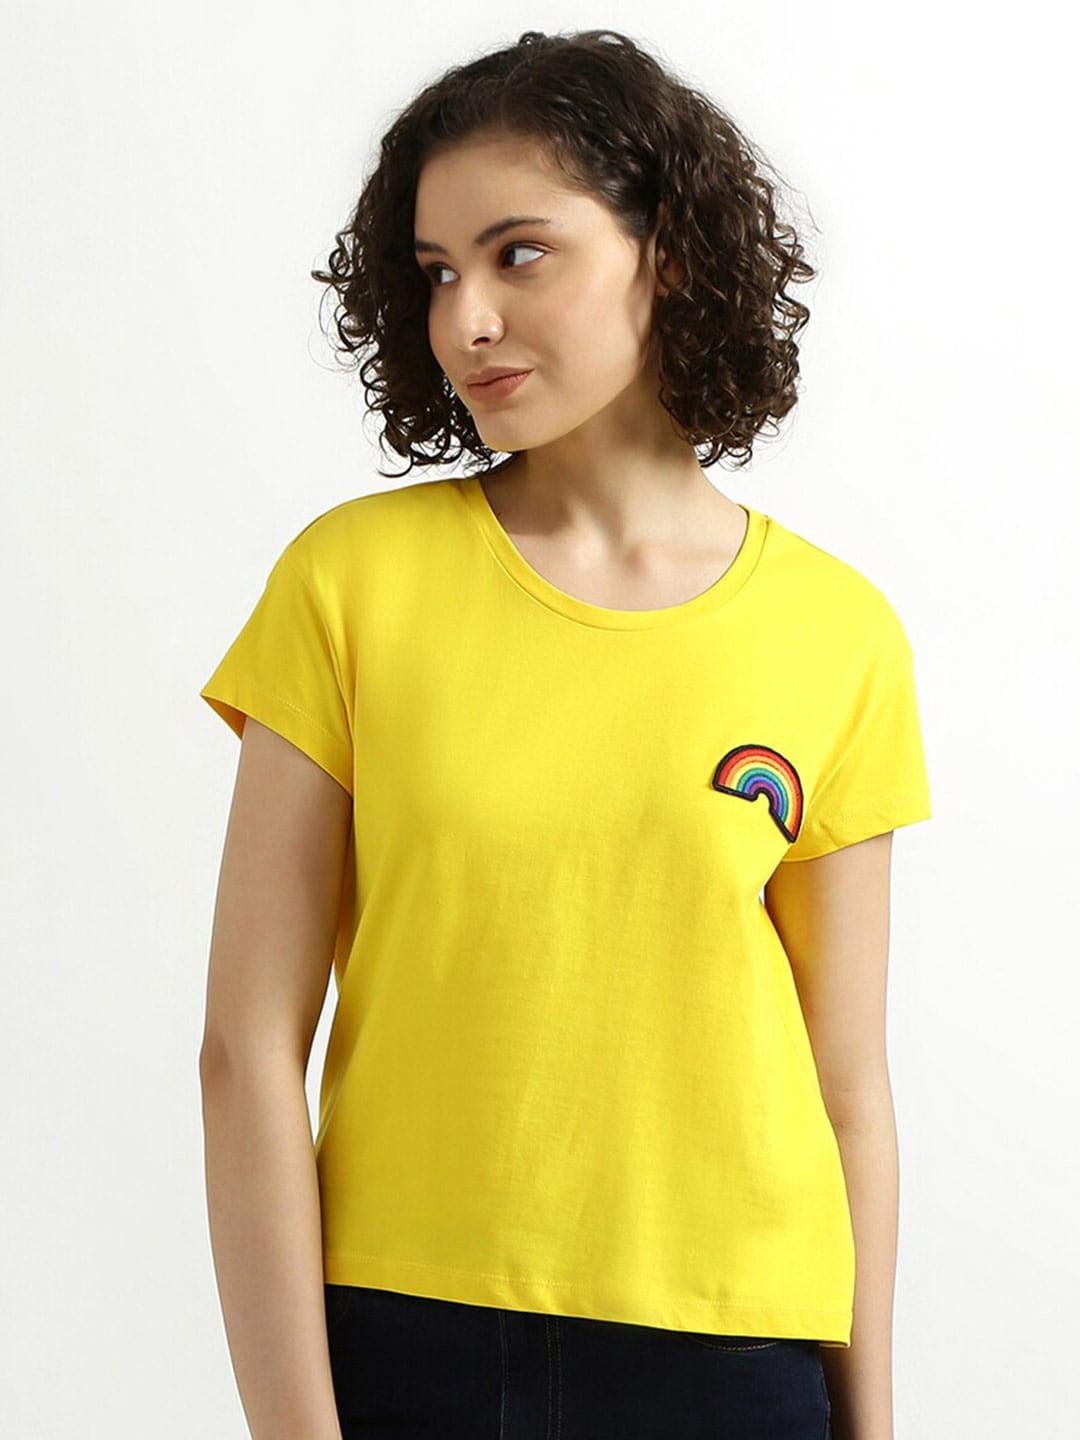 United Colors of Benetton Woman Yellow Top Price in India